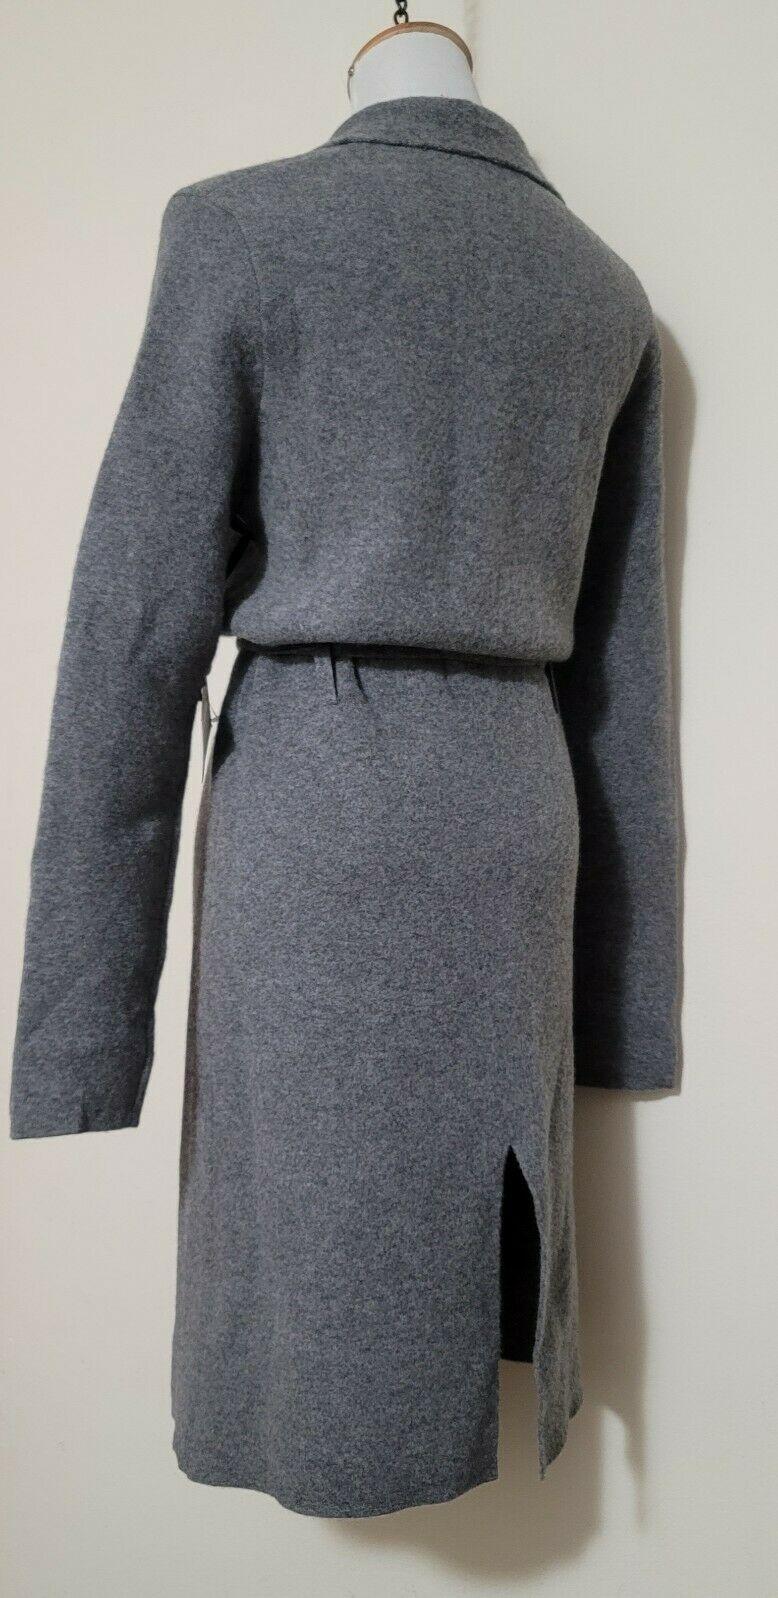 SWTR Touch of Cashmere Women's Merino Wool Gray Open Front Belted Coat Size S-M - SVNYFancy